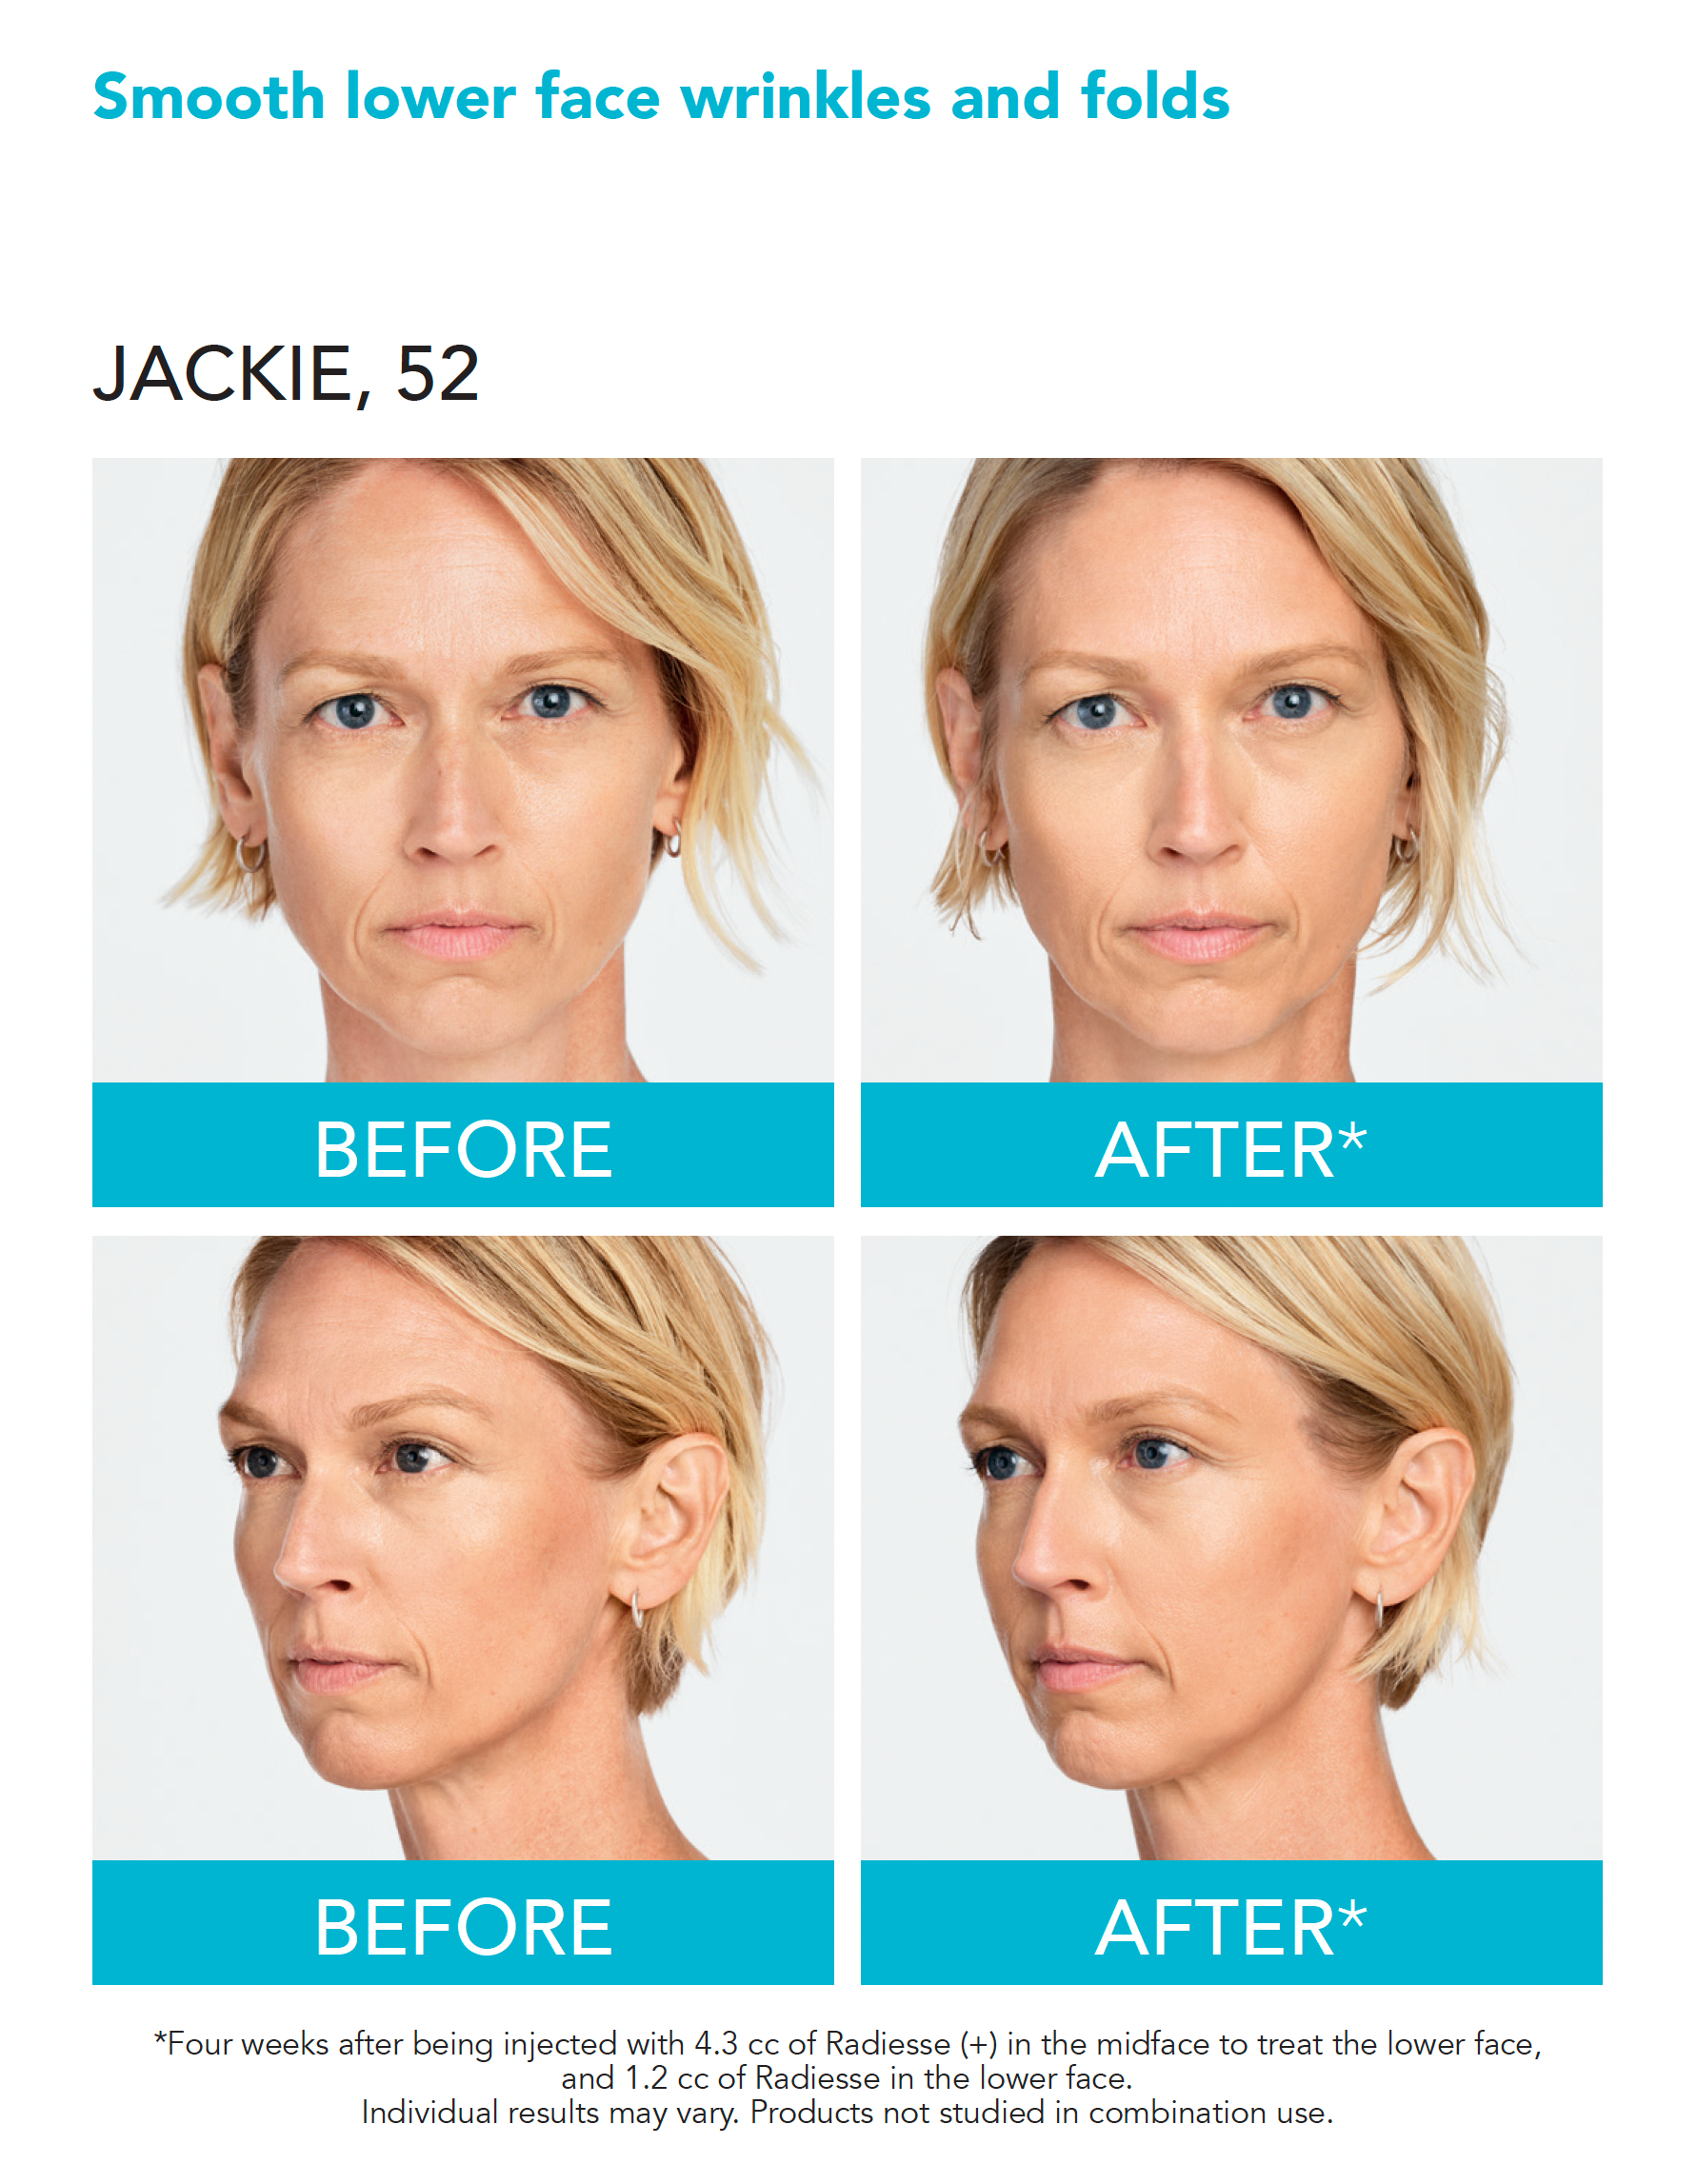 real patient shown before and after treatment with Radiesse